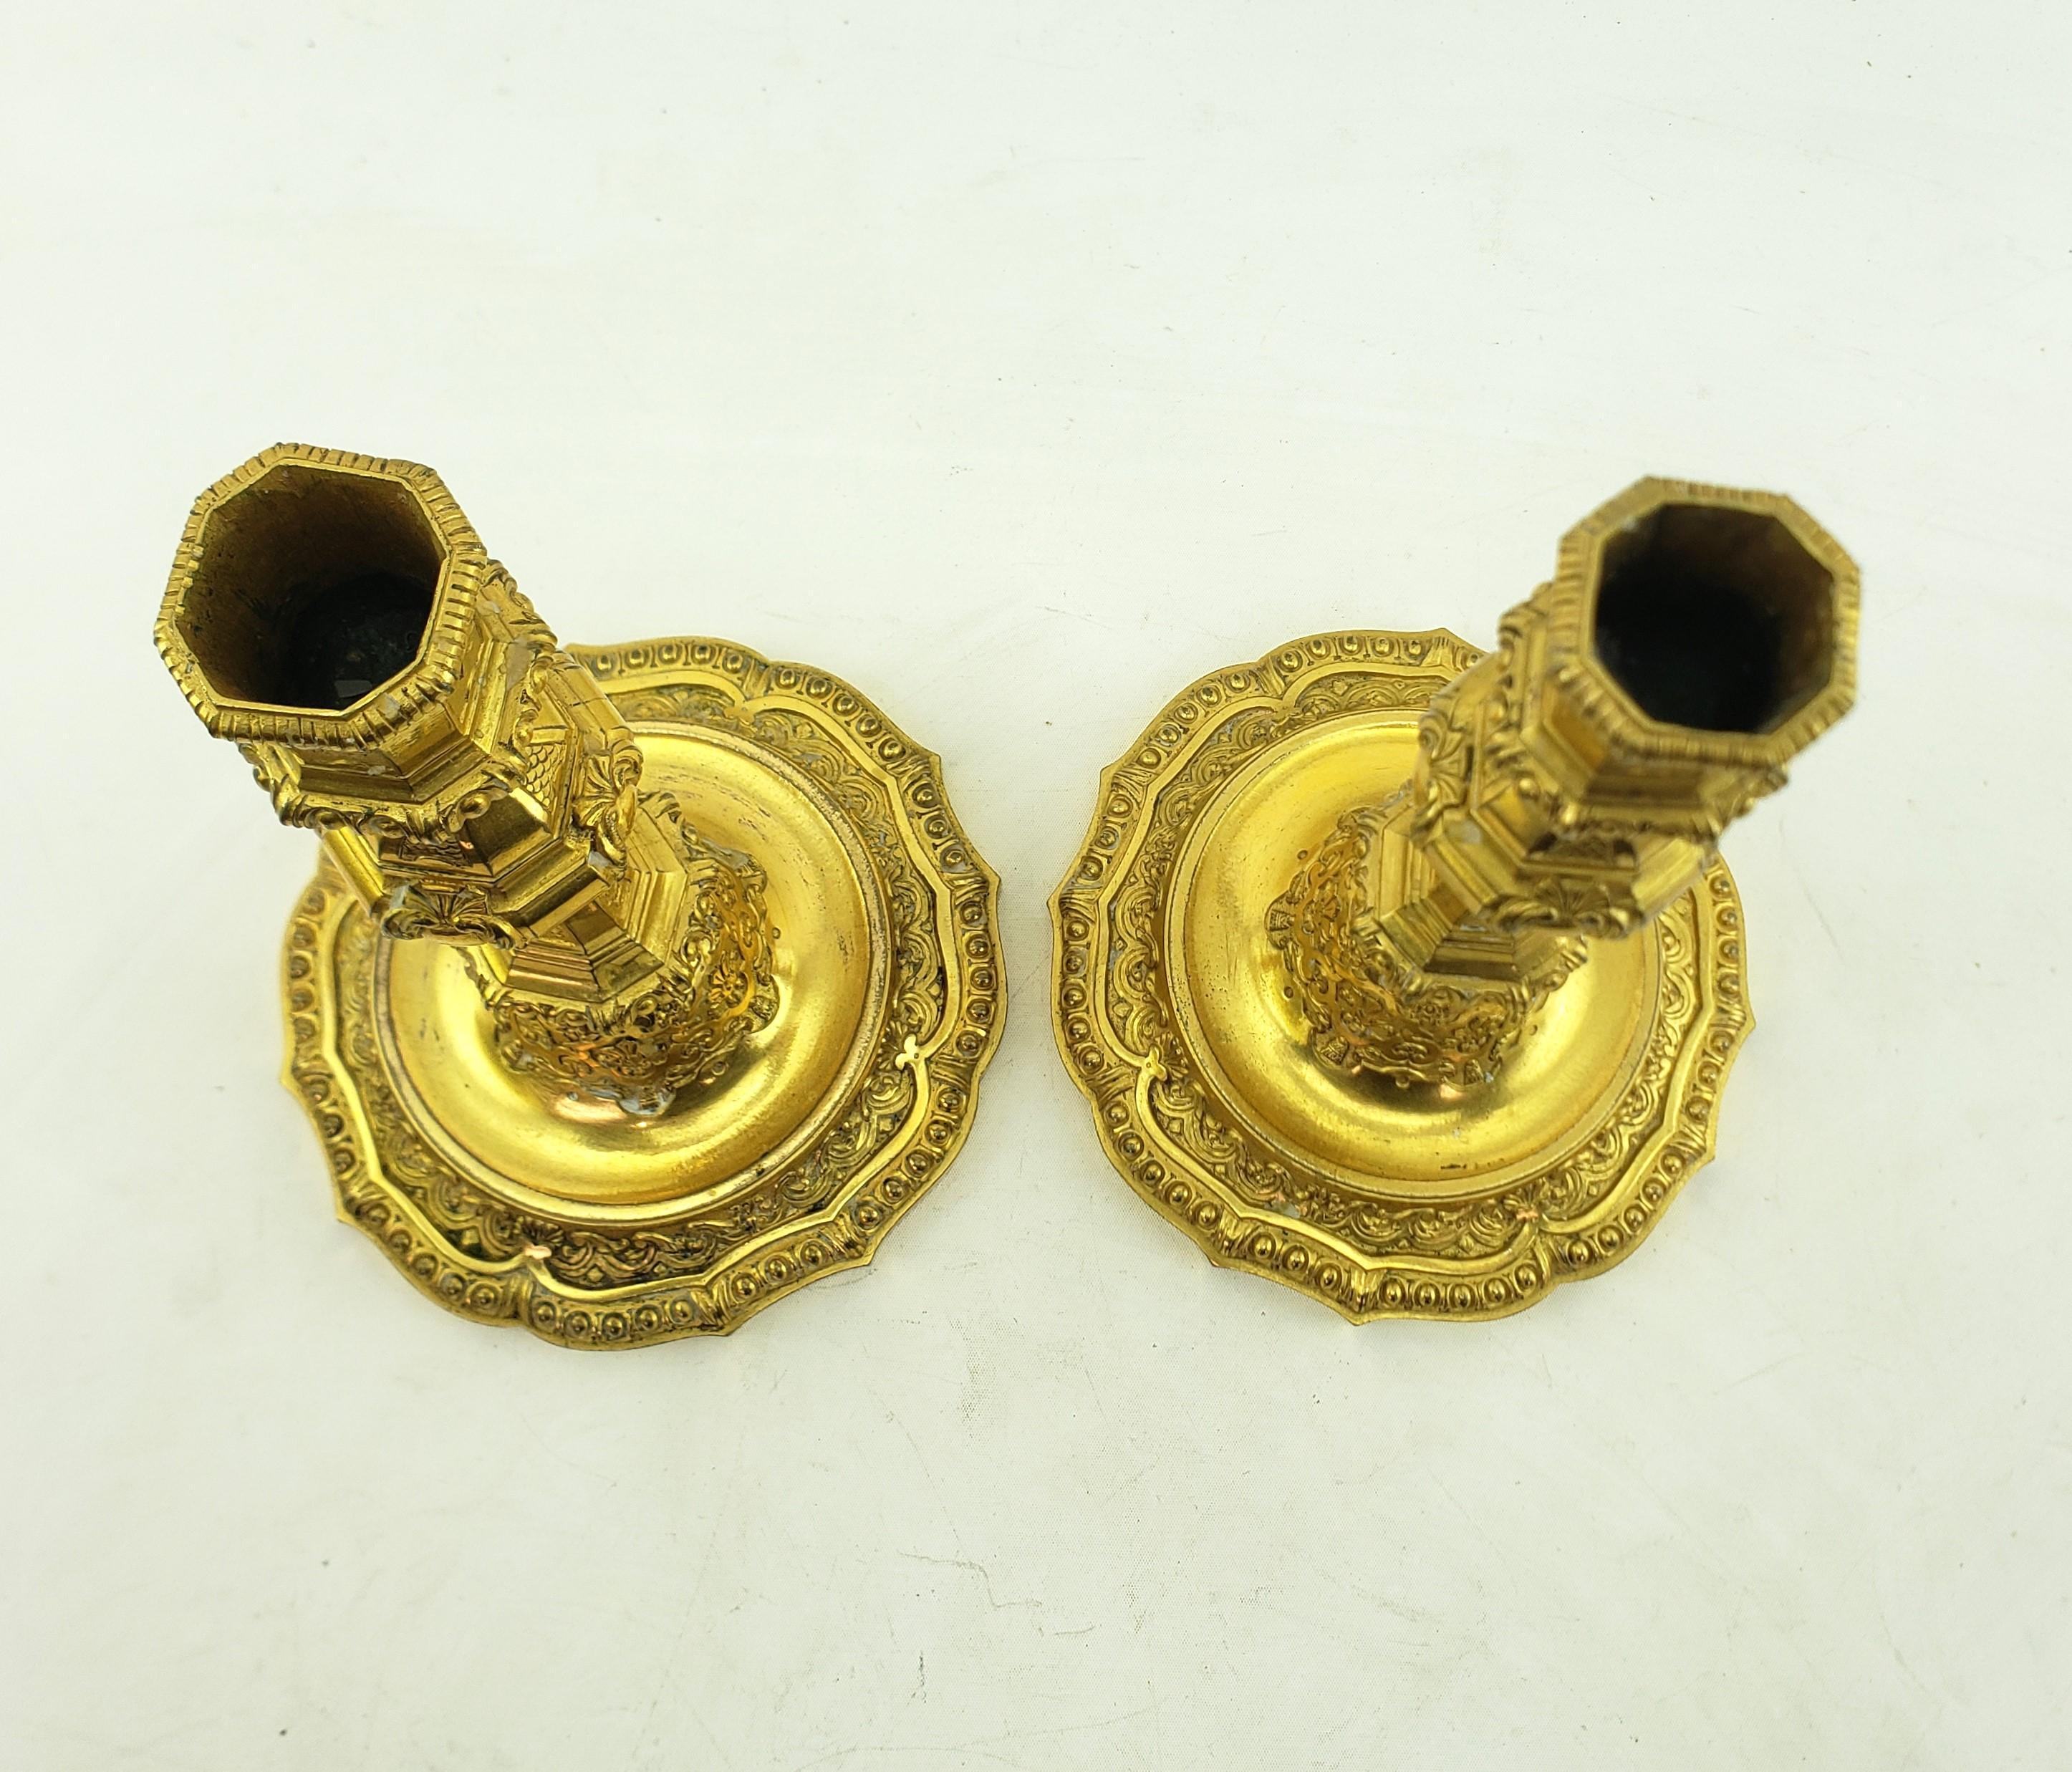 Pair of Antique Louis XIV Styled Gilt Bronze Candlesticks with Stylized Flowers For Sale 1